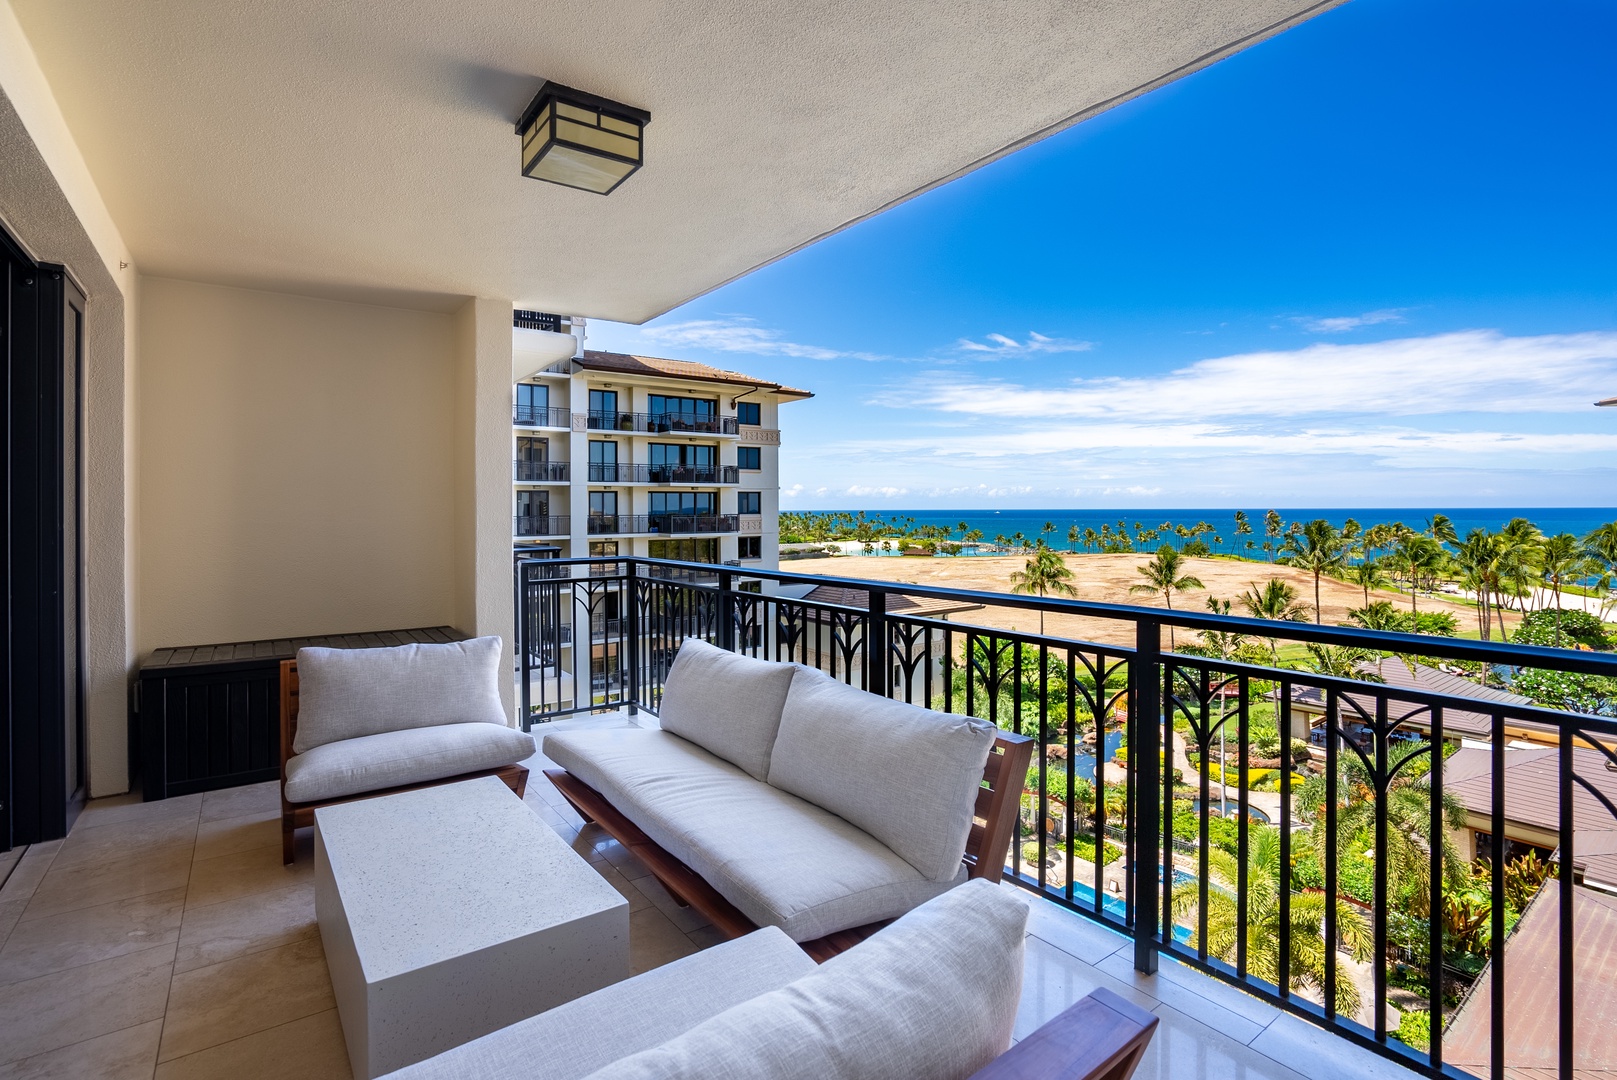 Your private balcony with ocean views